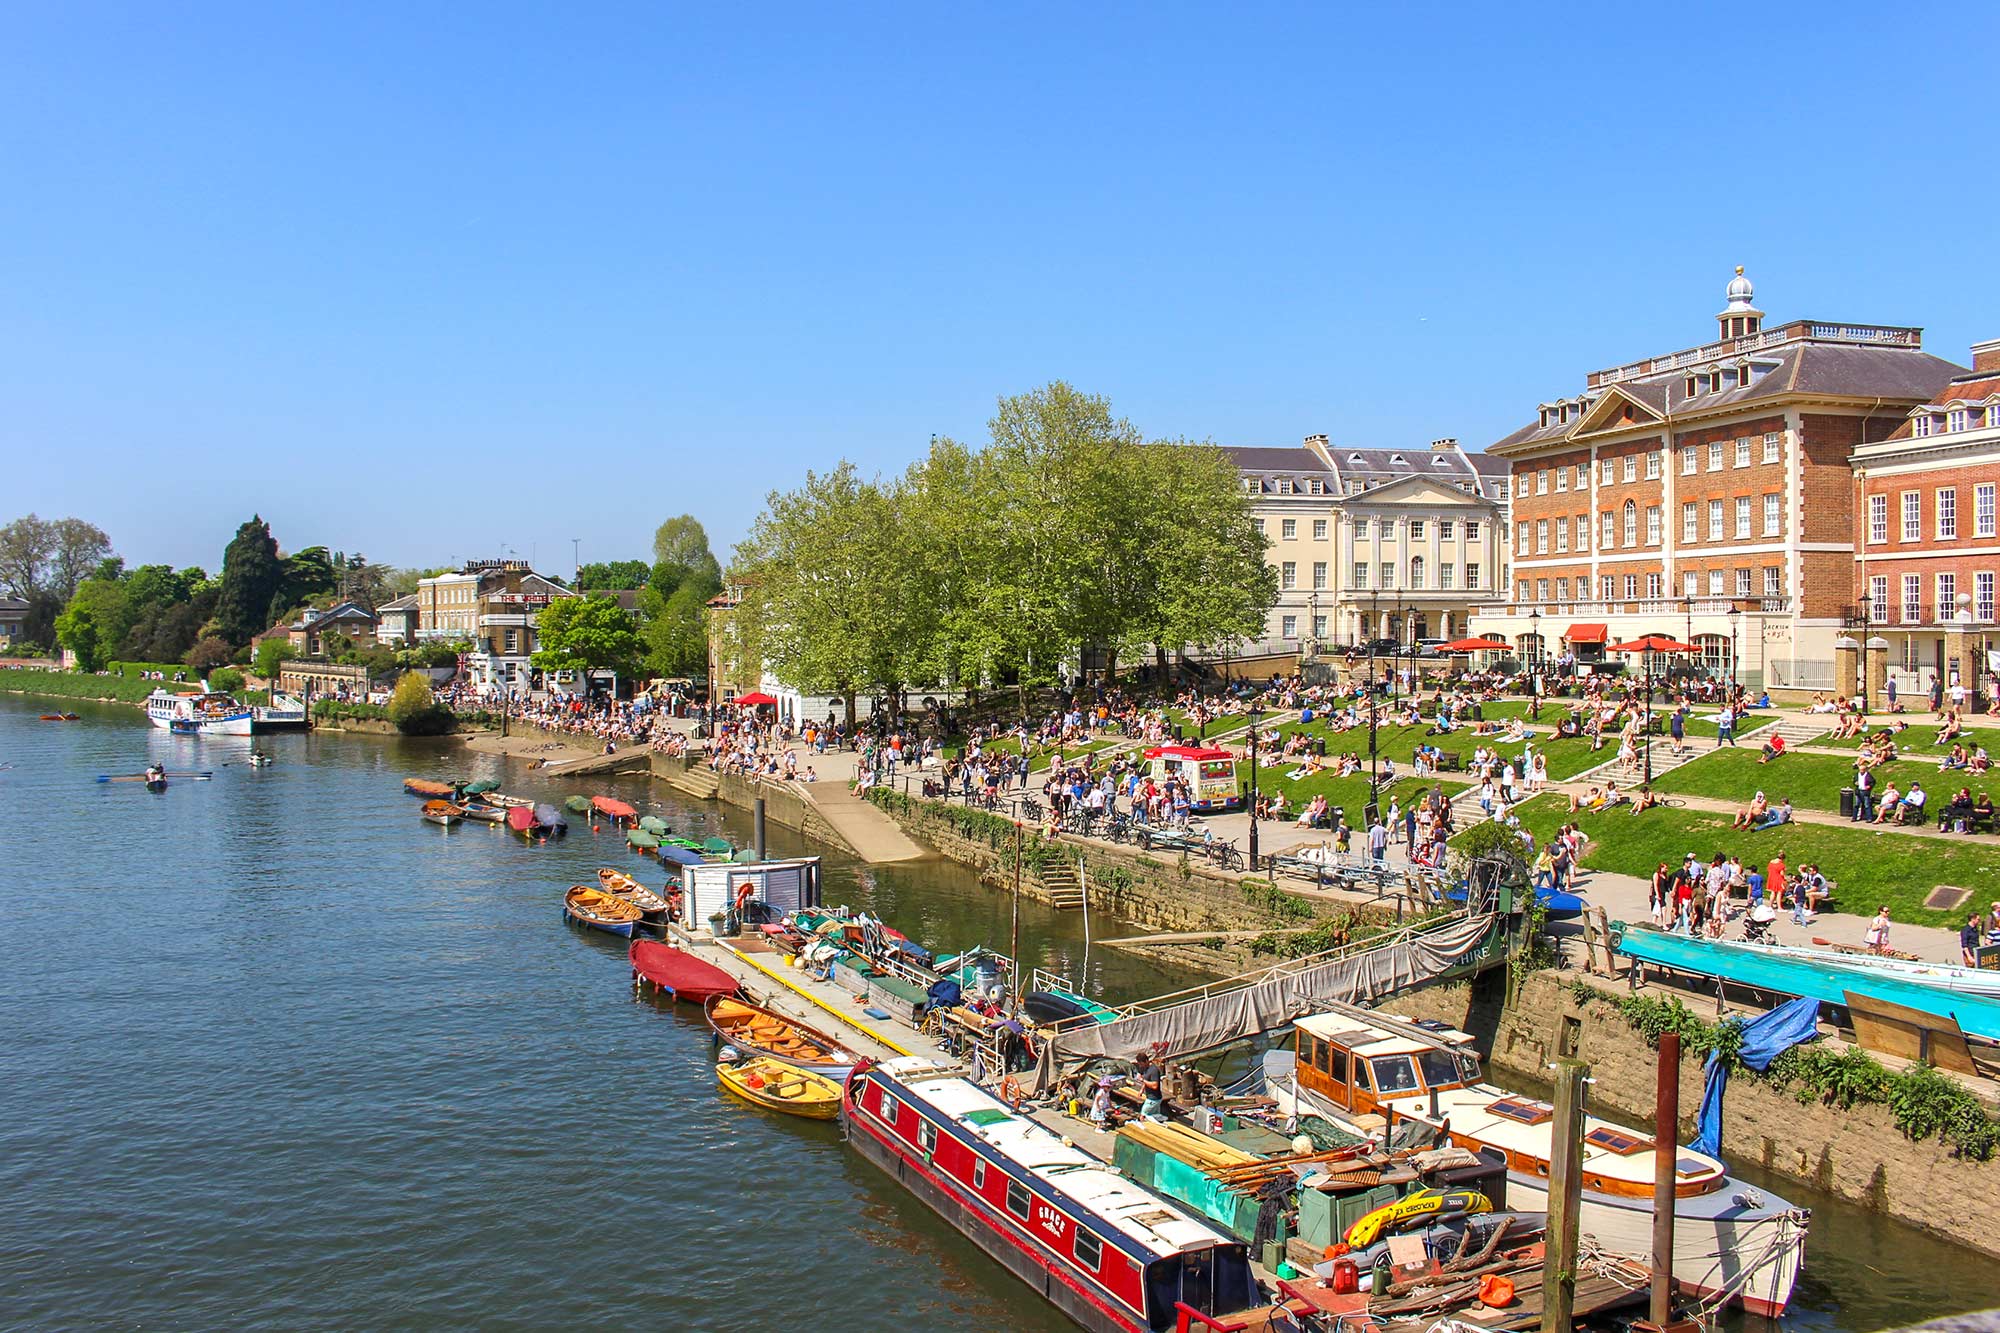 13 epic things to do in Richmond, London - travel guide - CK Travels